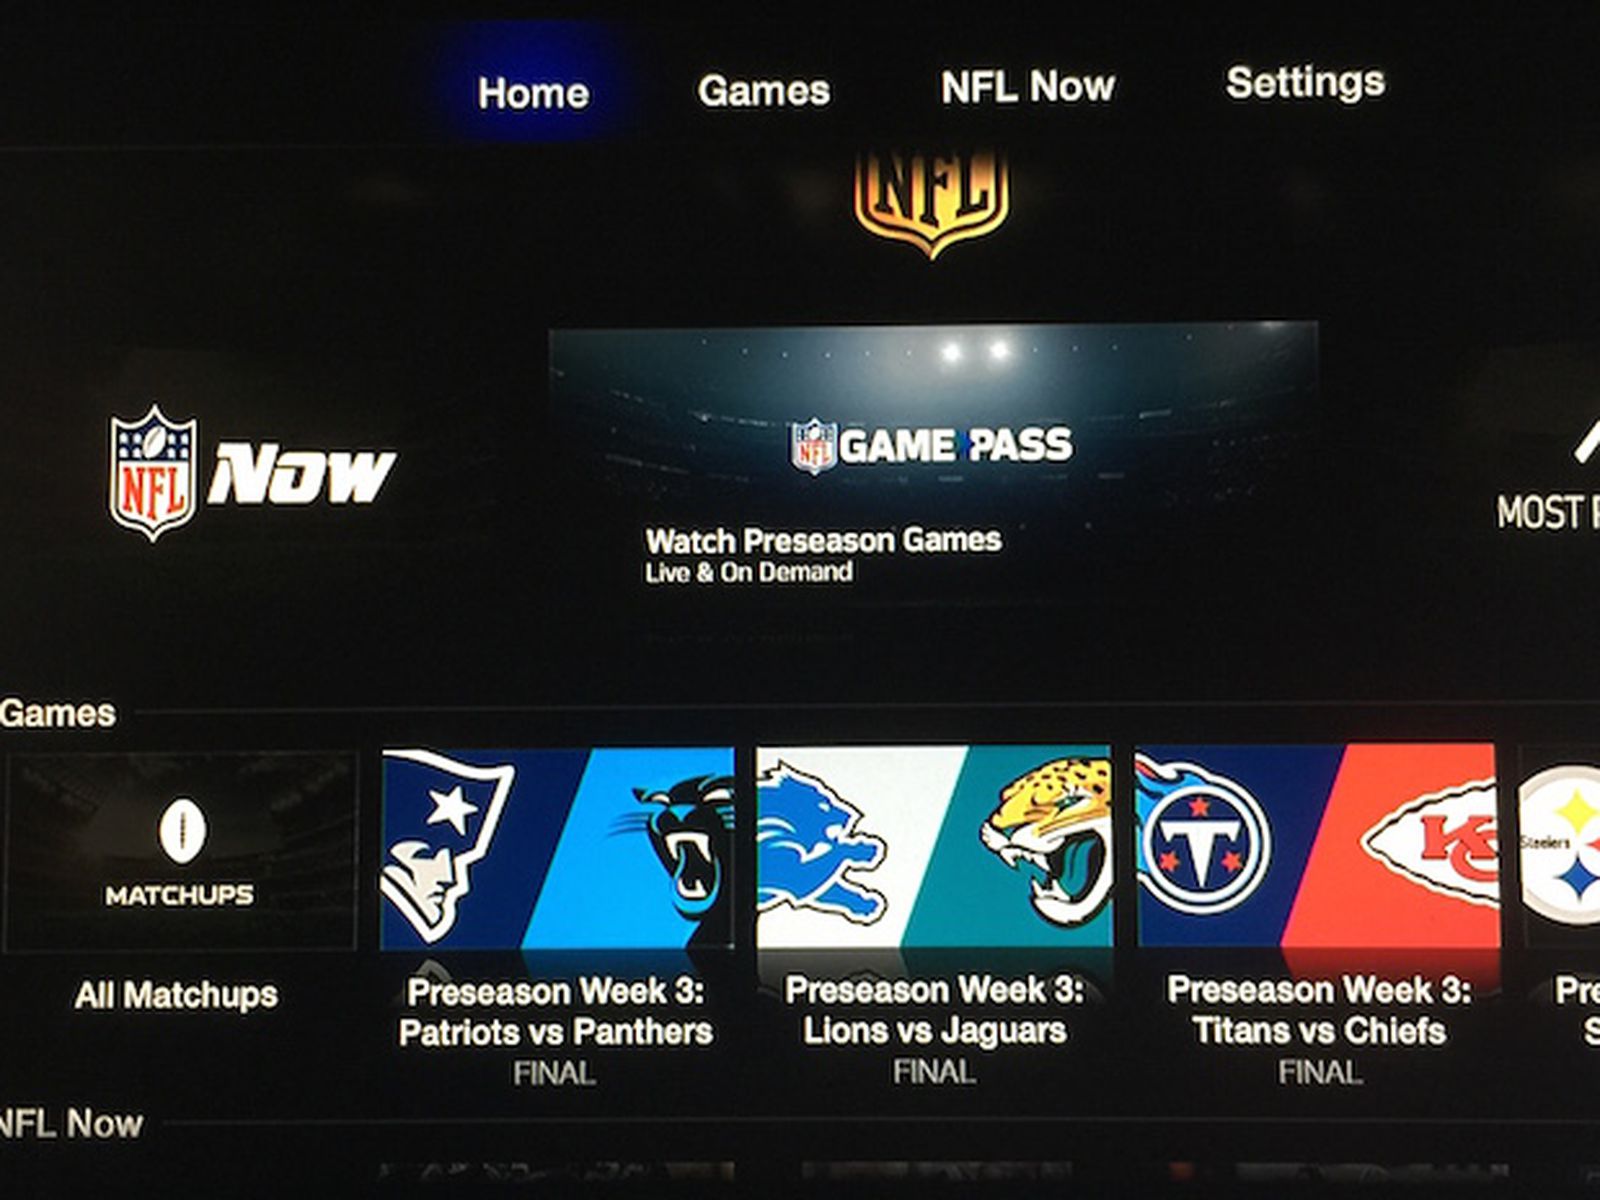 Apple TV Gains Updated NFL Channel With Game Pass Integration - MacRumors